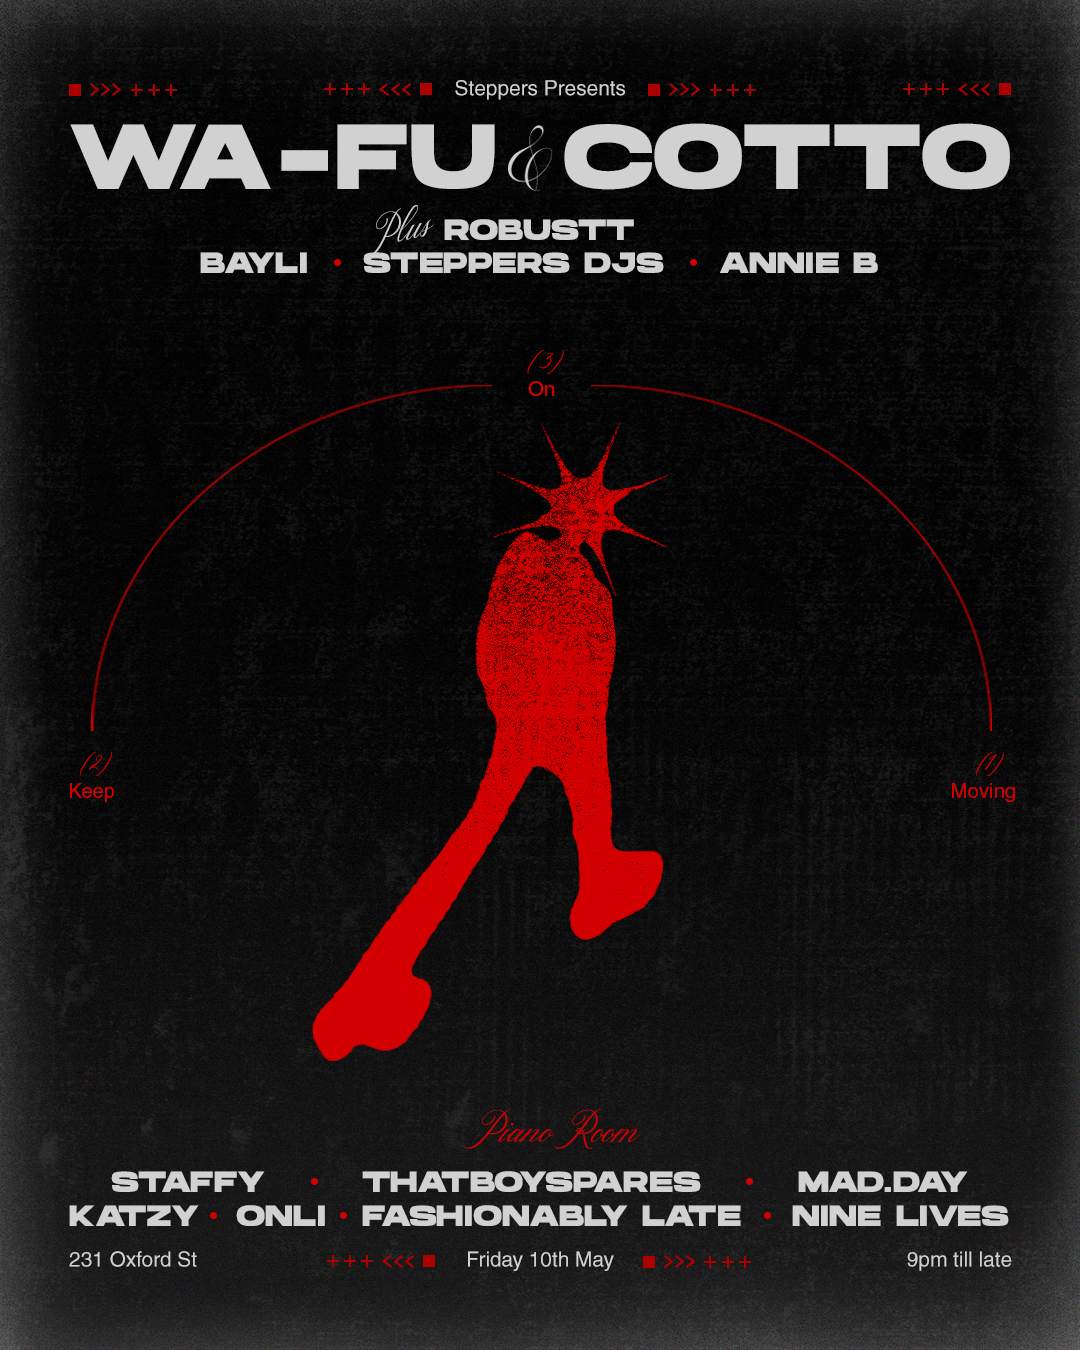 Steppers Home Coming feat. Wafu, Cotto & Robustt - Página frontal